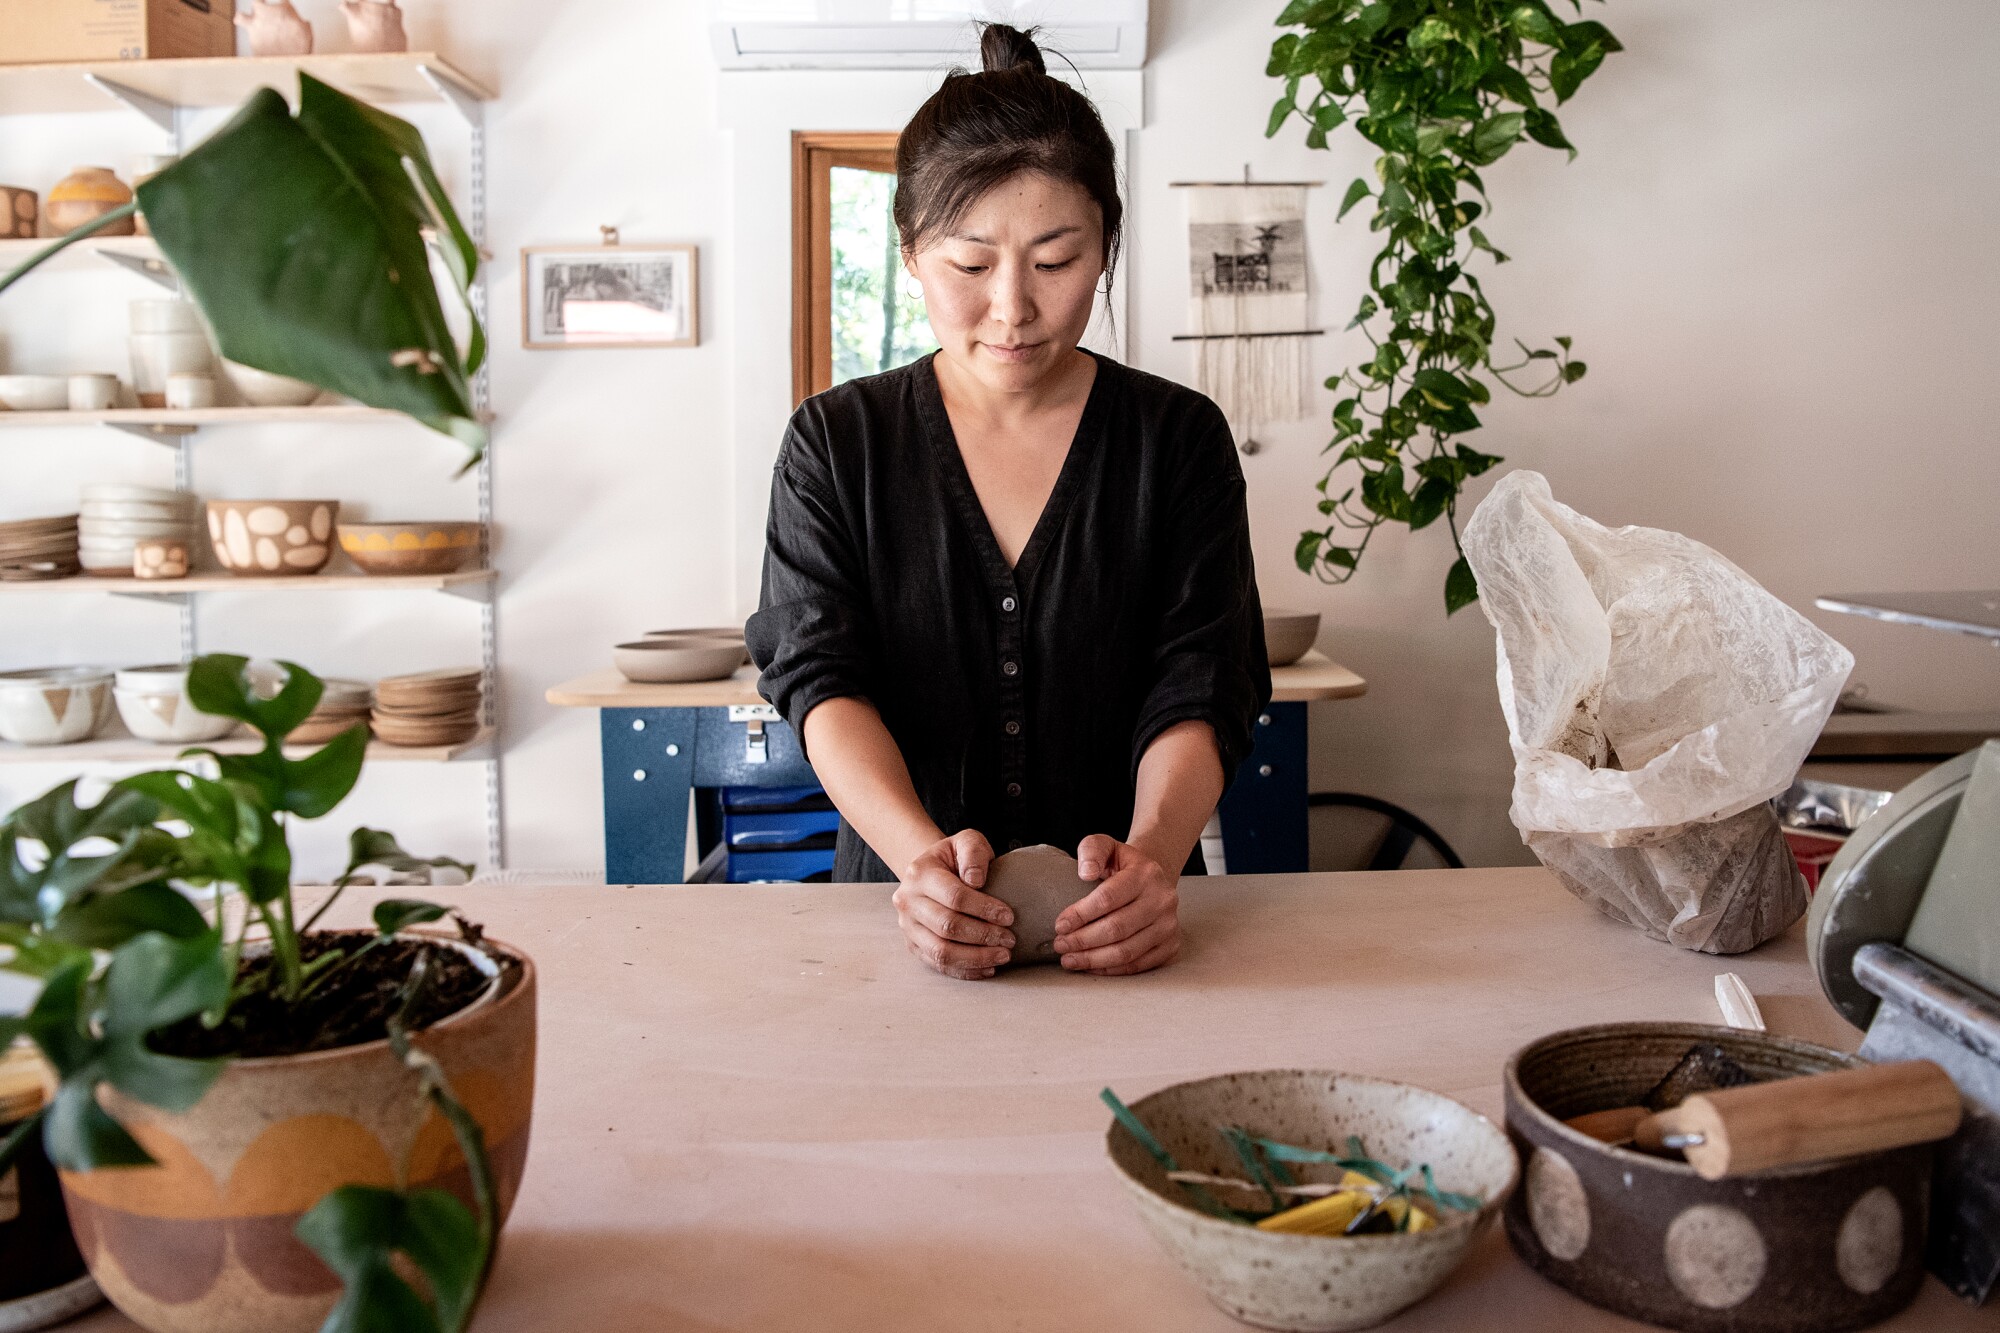 A woman using her hands to shape clay